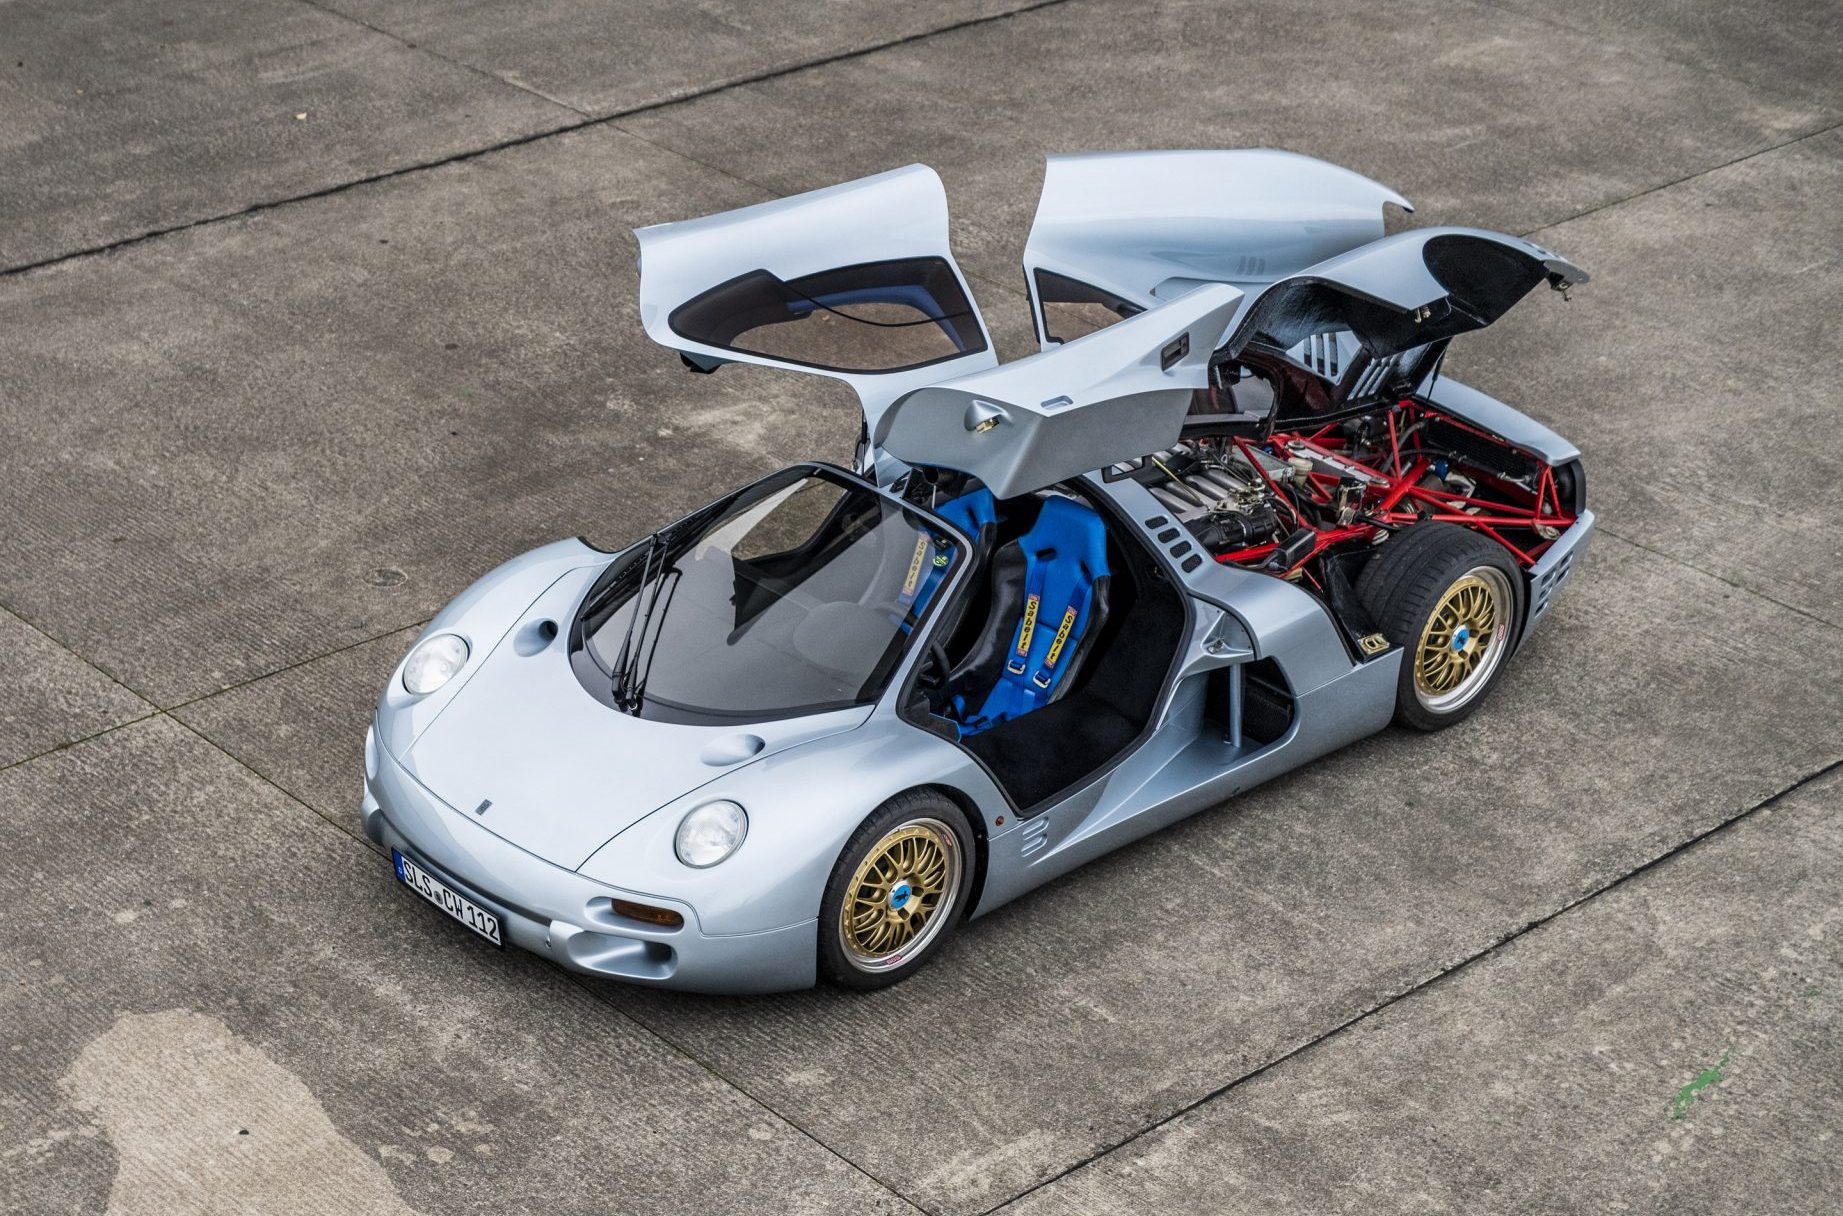 The Zonda-powered Isdera Commendatore is the wildest ’90s supercar nobody knows